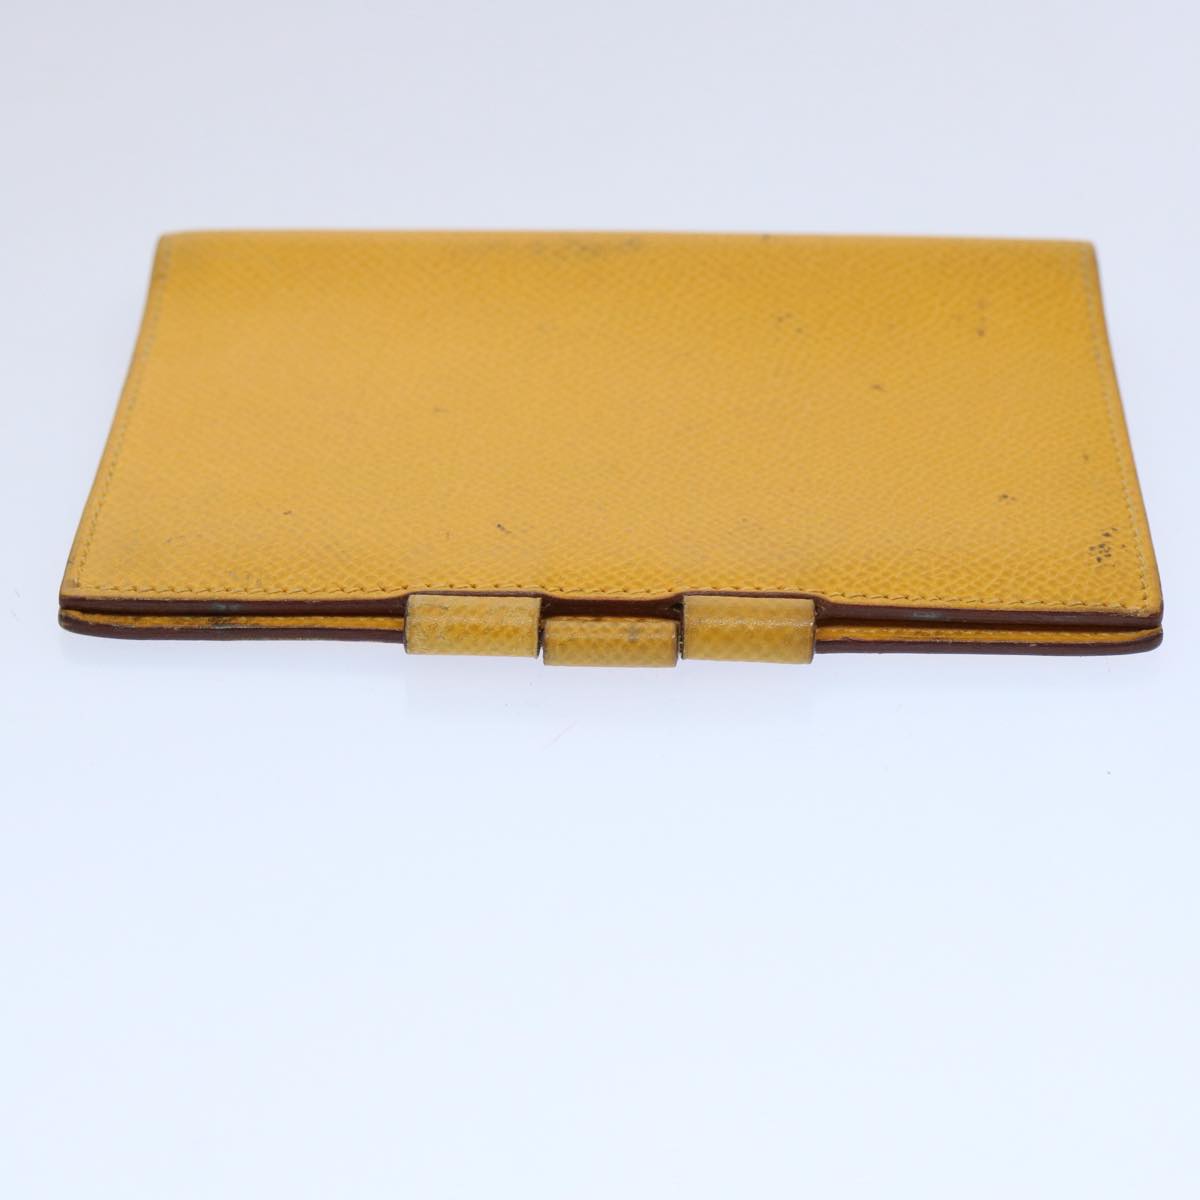 HERMES Agenda Day Planner Cover Leather Yellow Auth bs10919